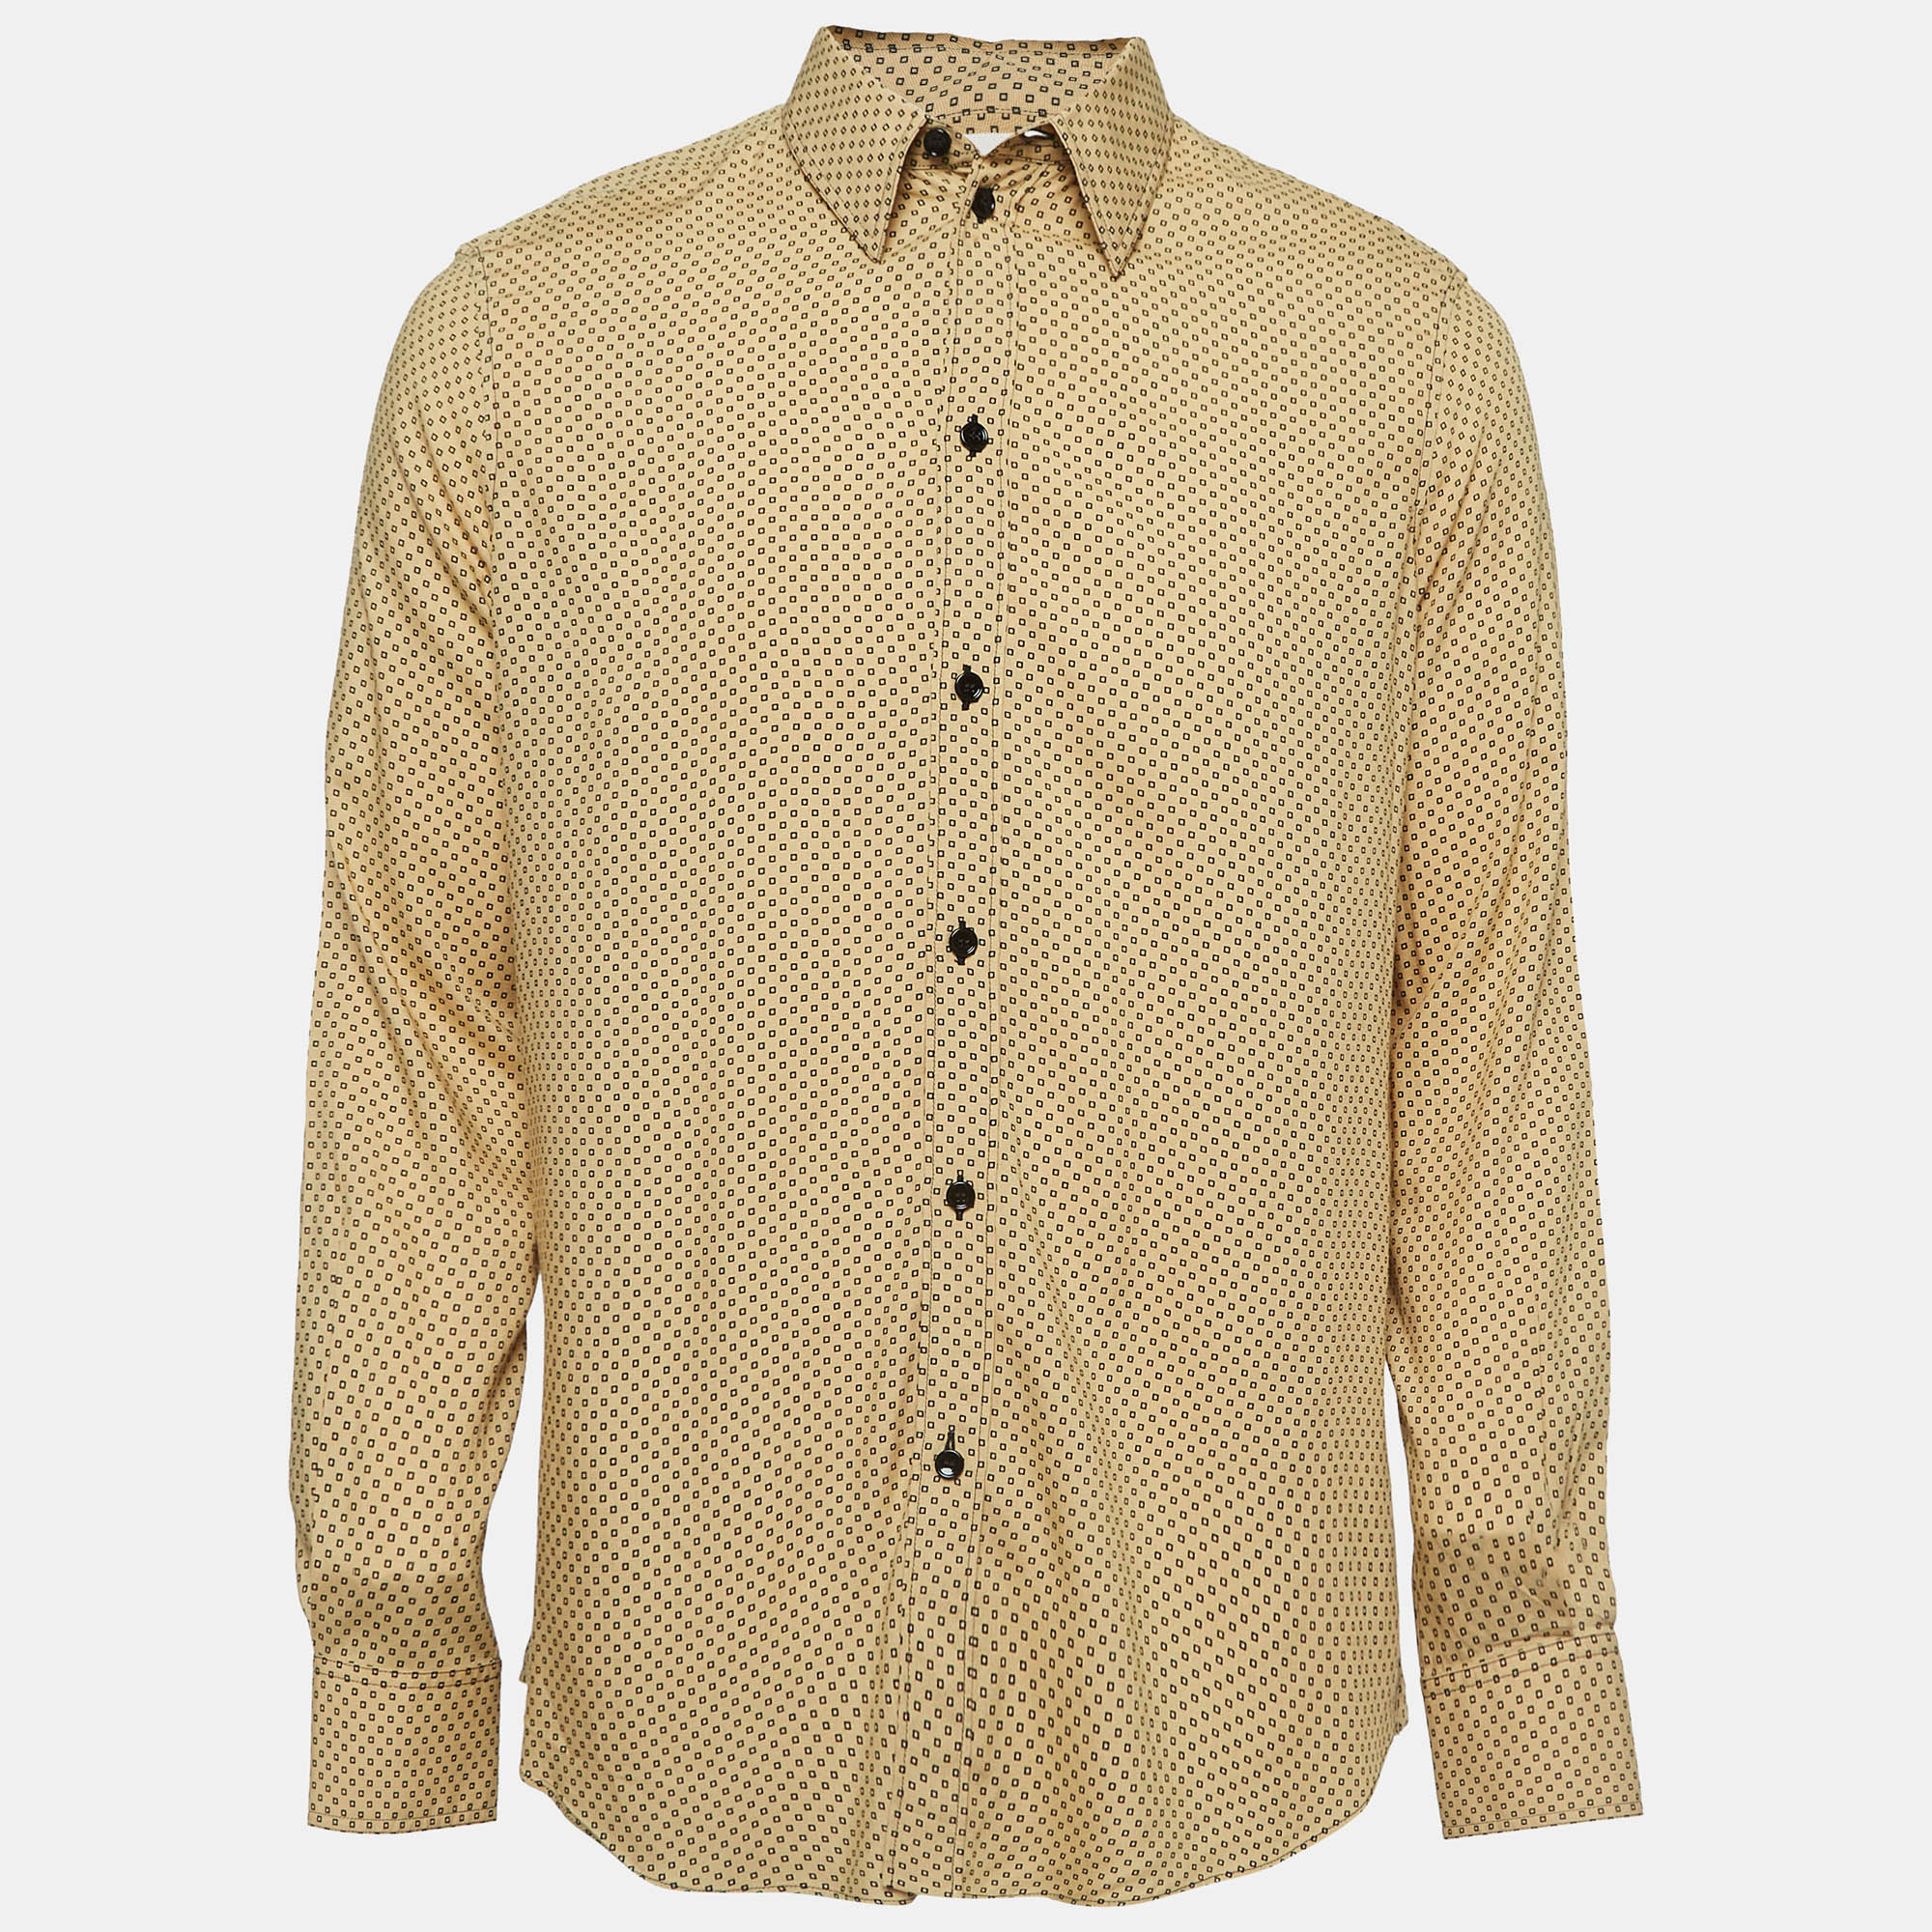 Pre-owned Celine Yellow Square Printed Crepe Buttoned Shirt L